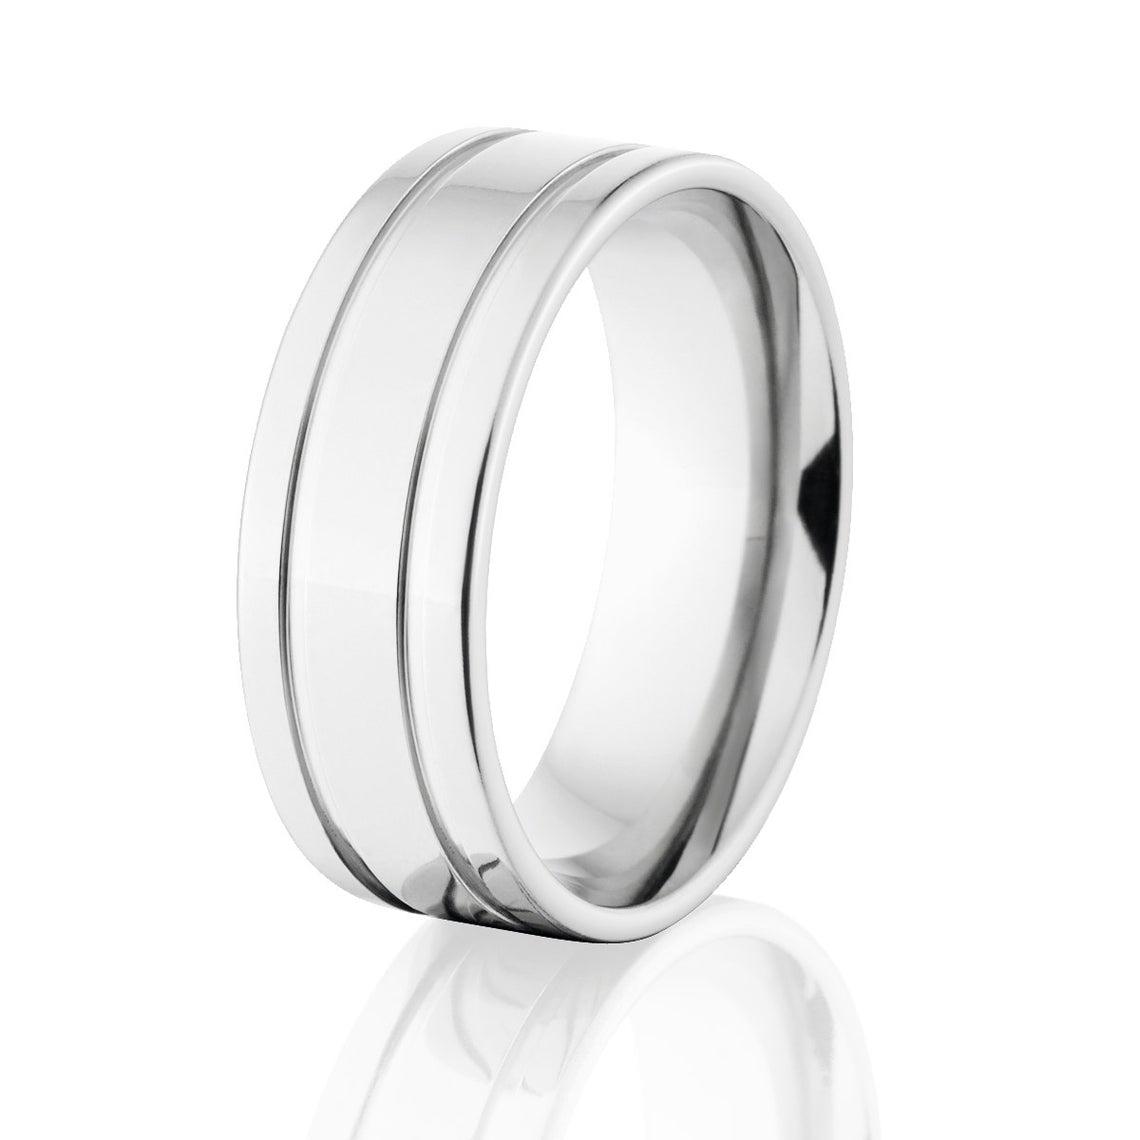 8mm wide cobalt wedding band with dual edge grooves and a flat profile